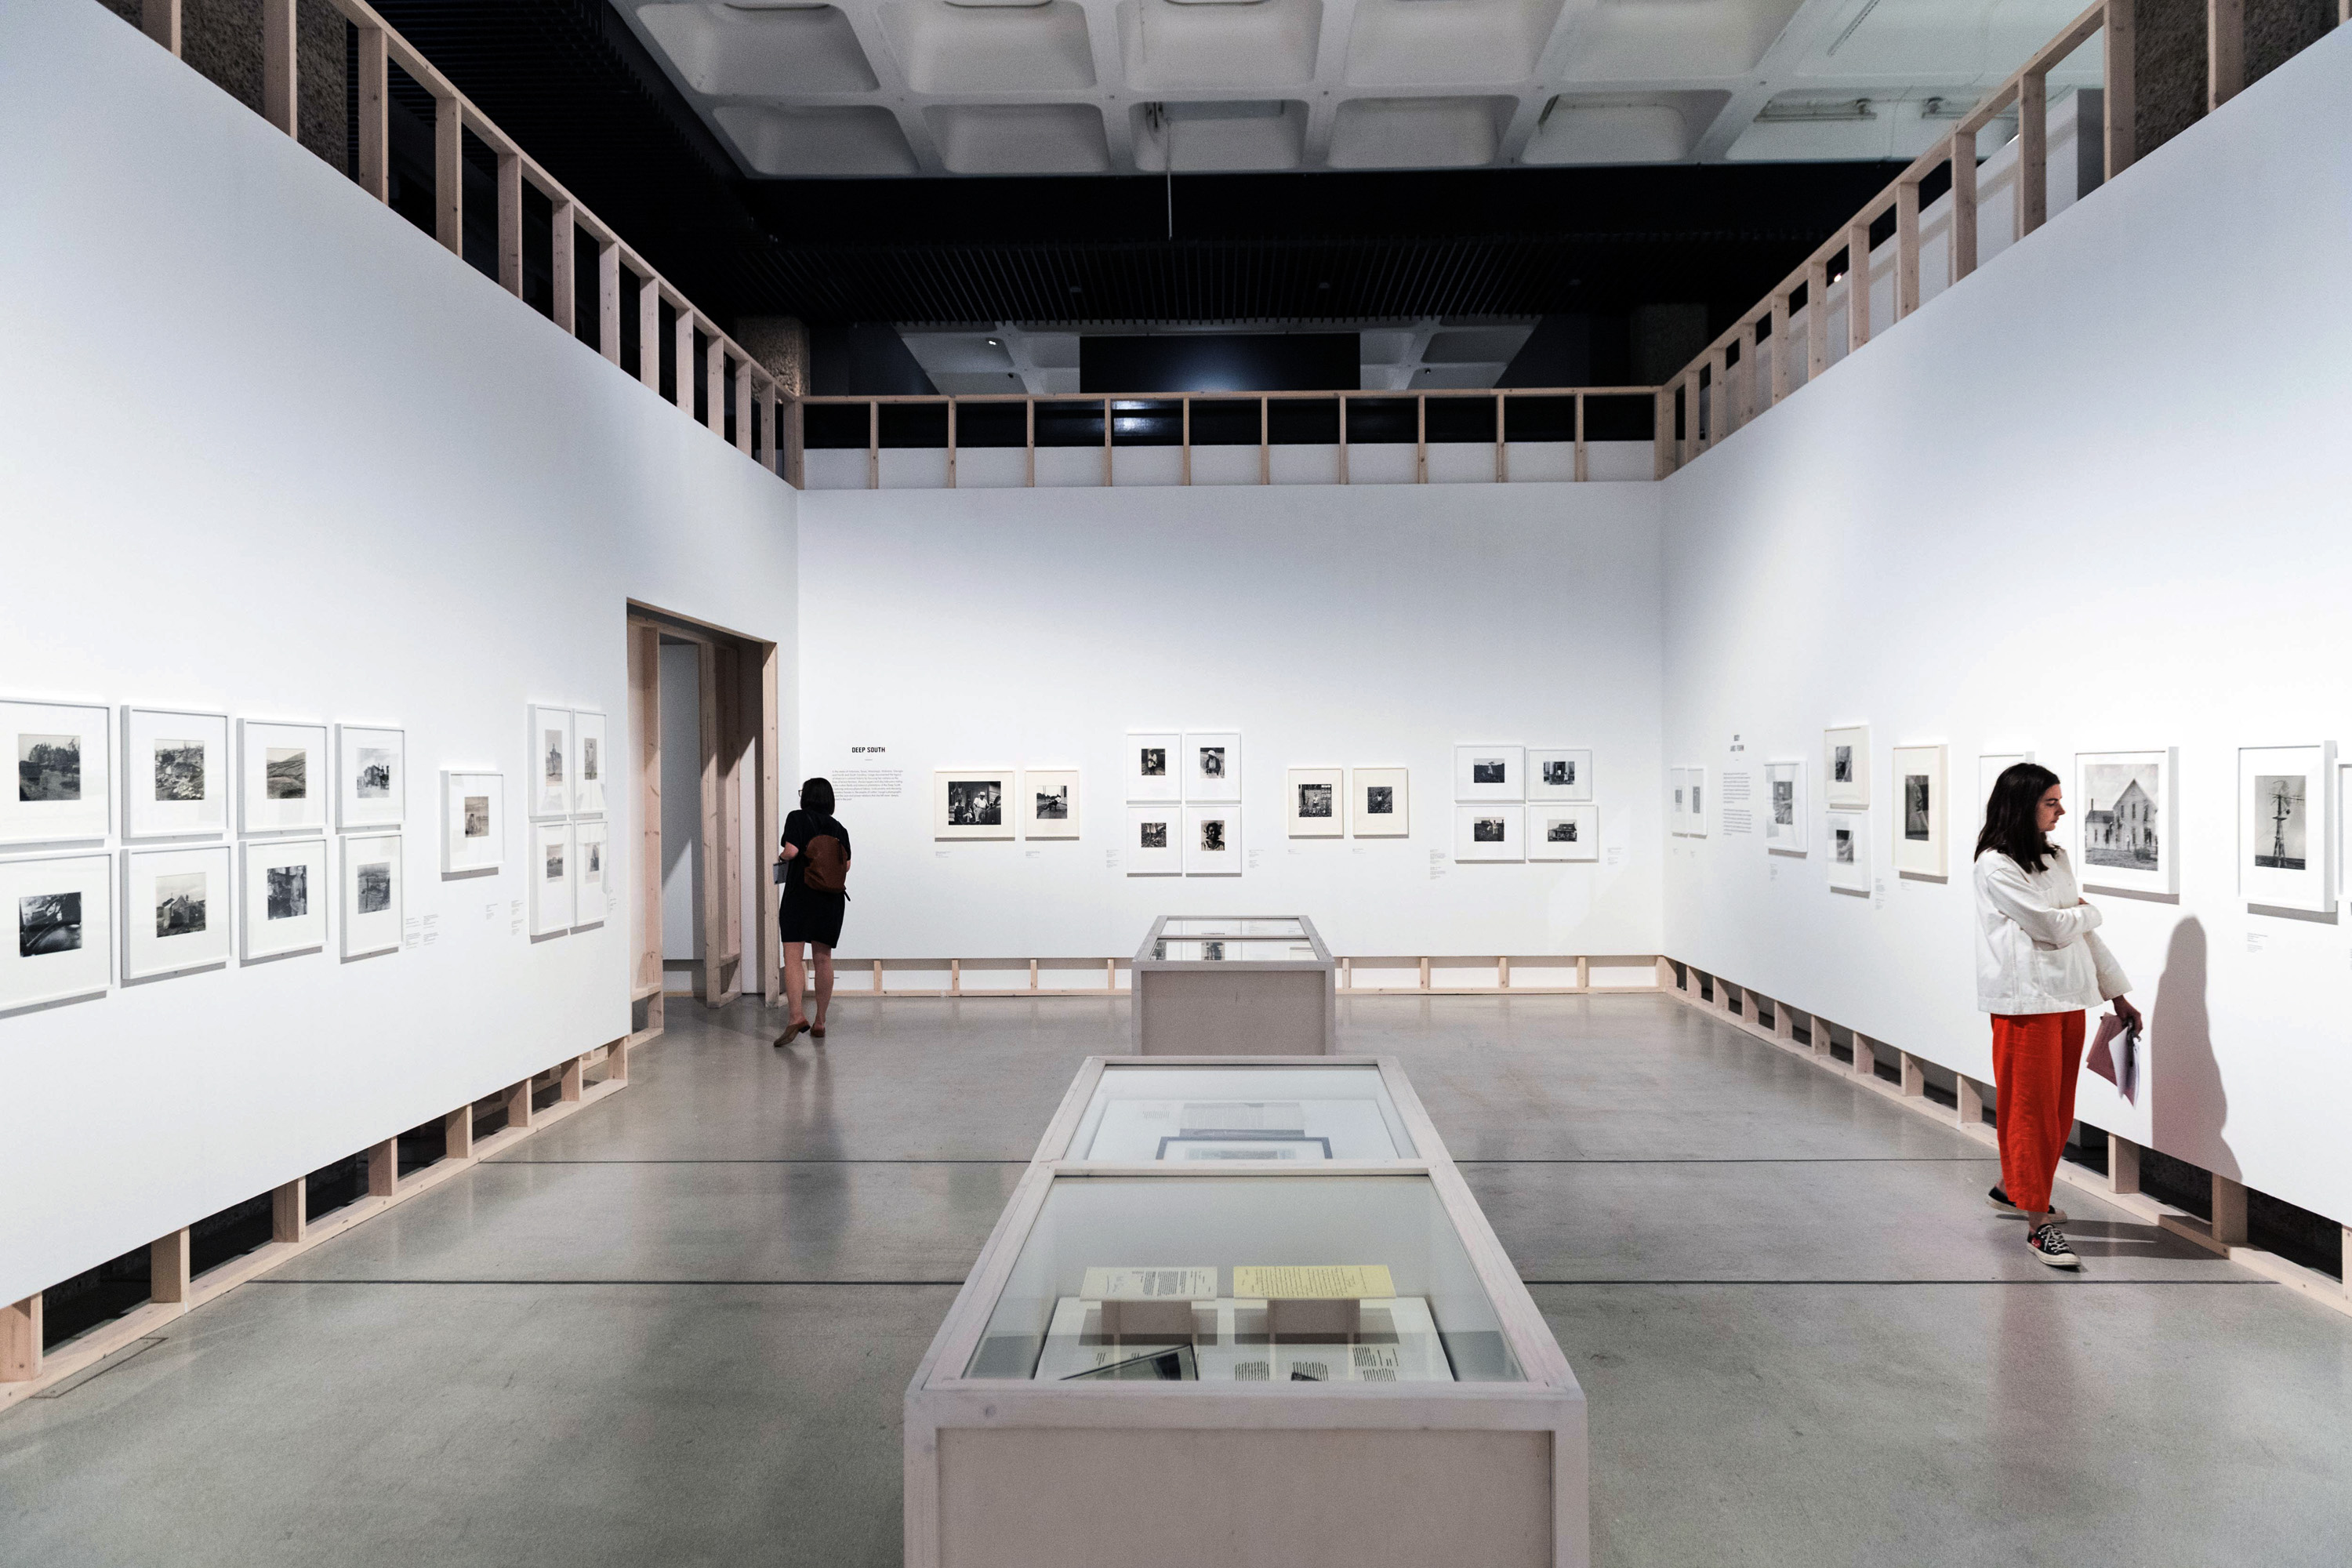 Dorothea Lange: Politics Of Seeing & Vanessa Winship: And Time Folds – Installation View